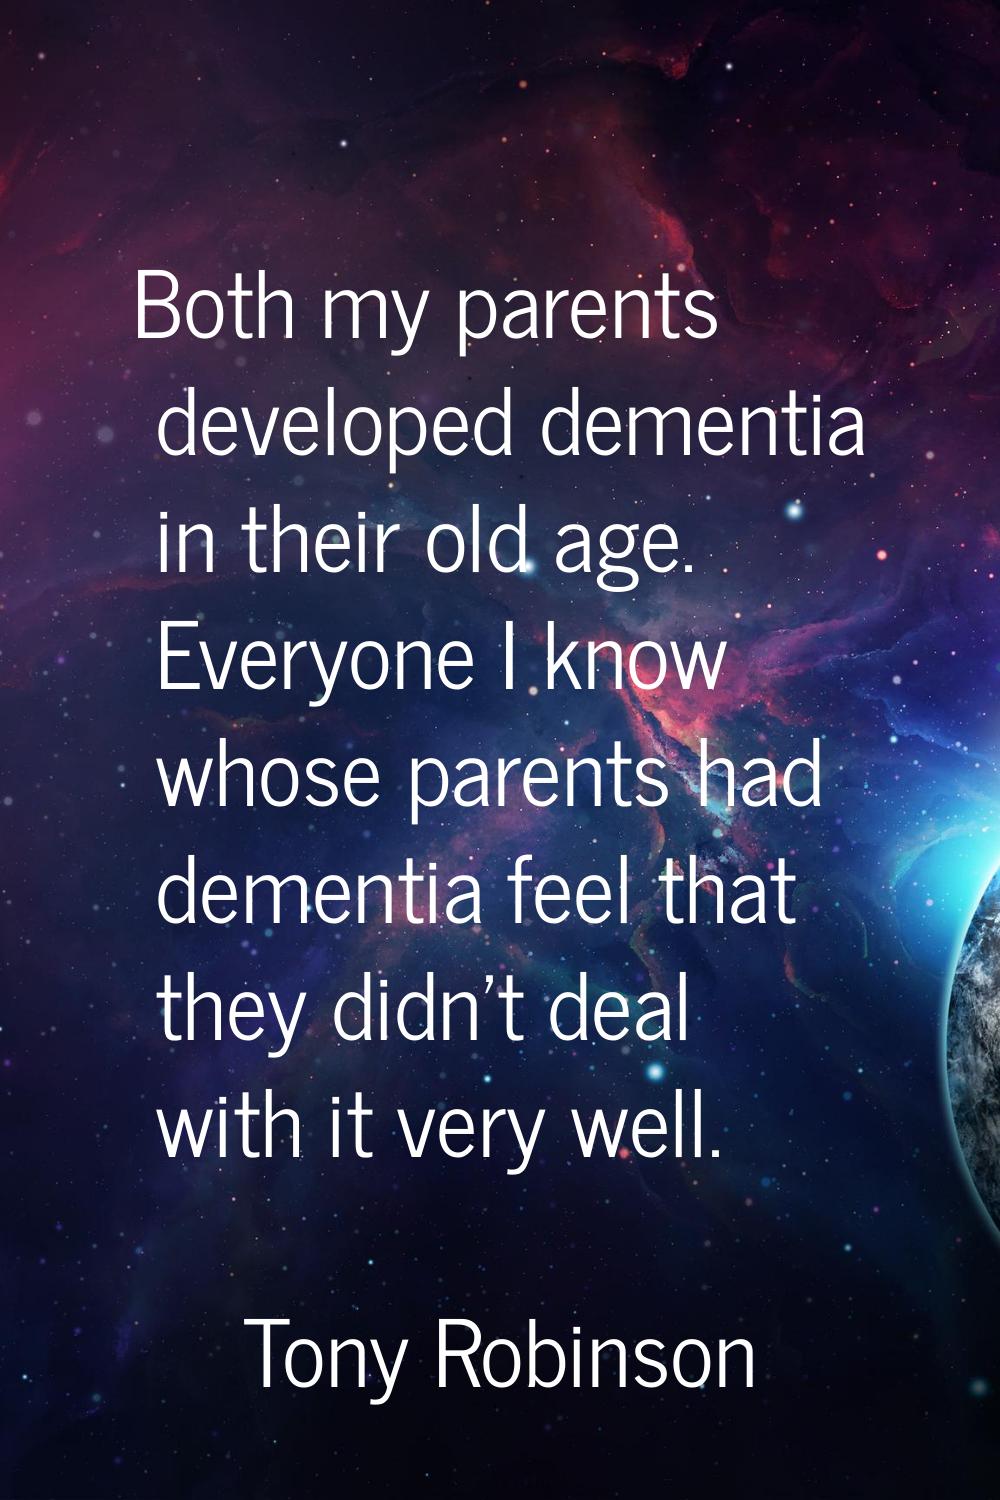 Both my parents developed dementia in their old age. Everyone I know whose parents had dementia fee